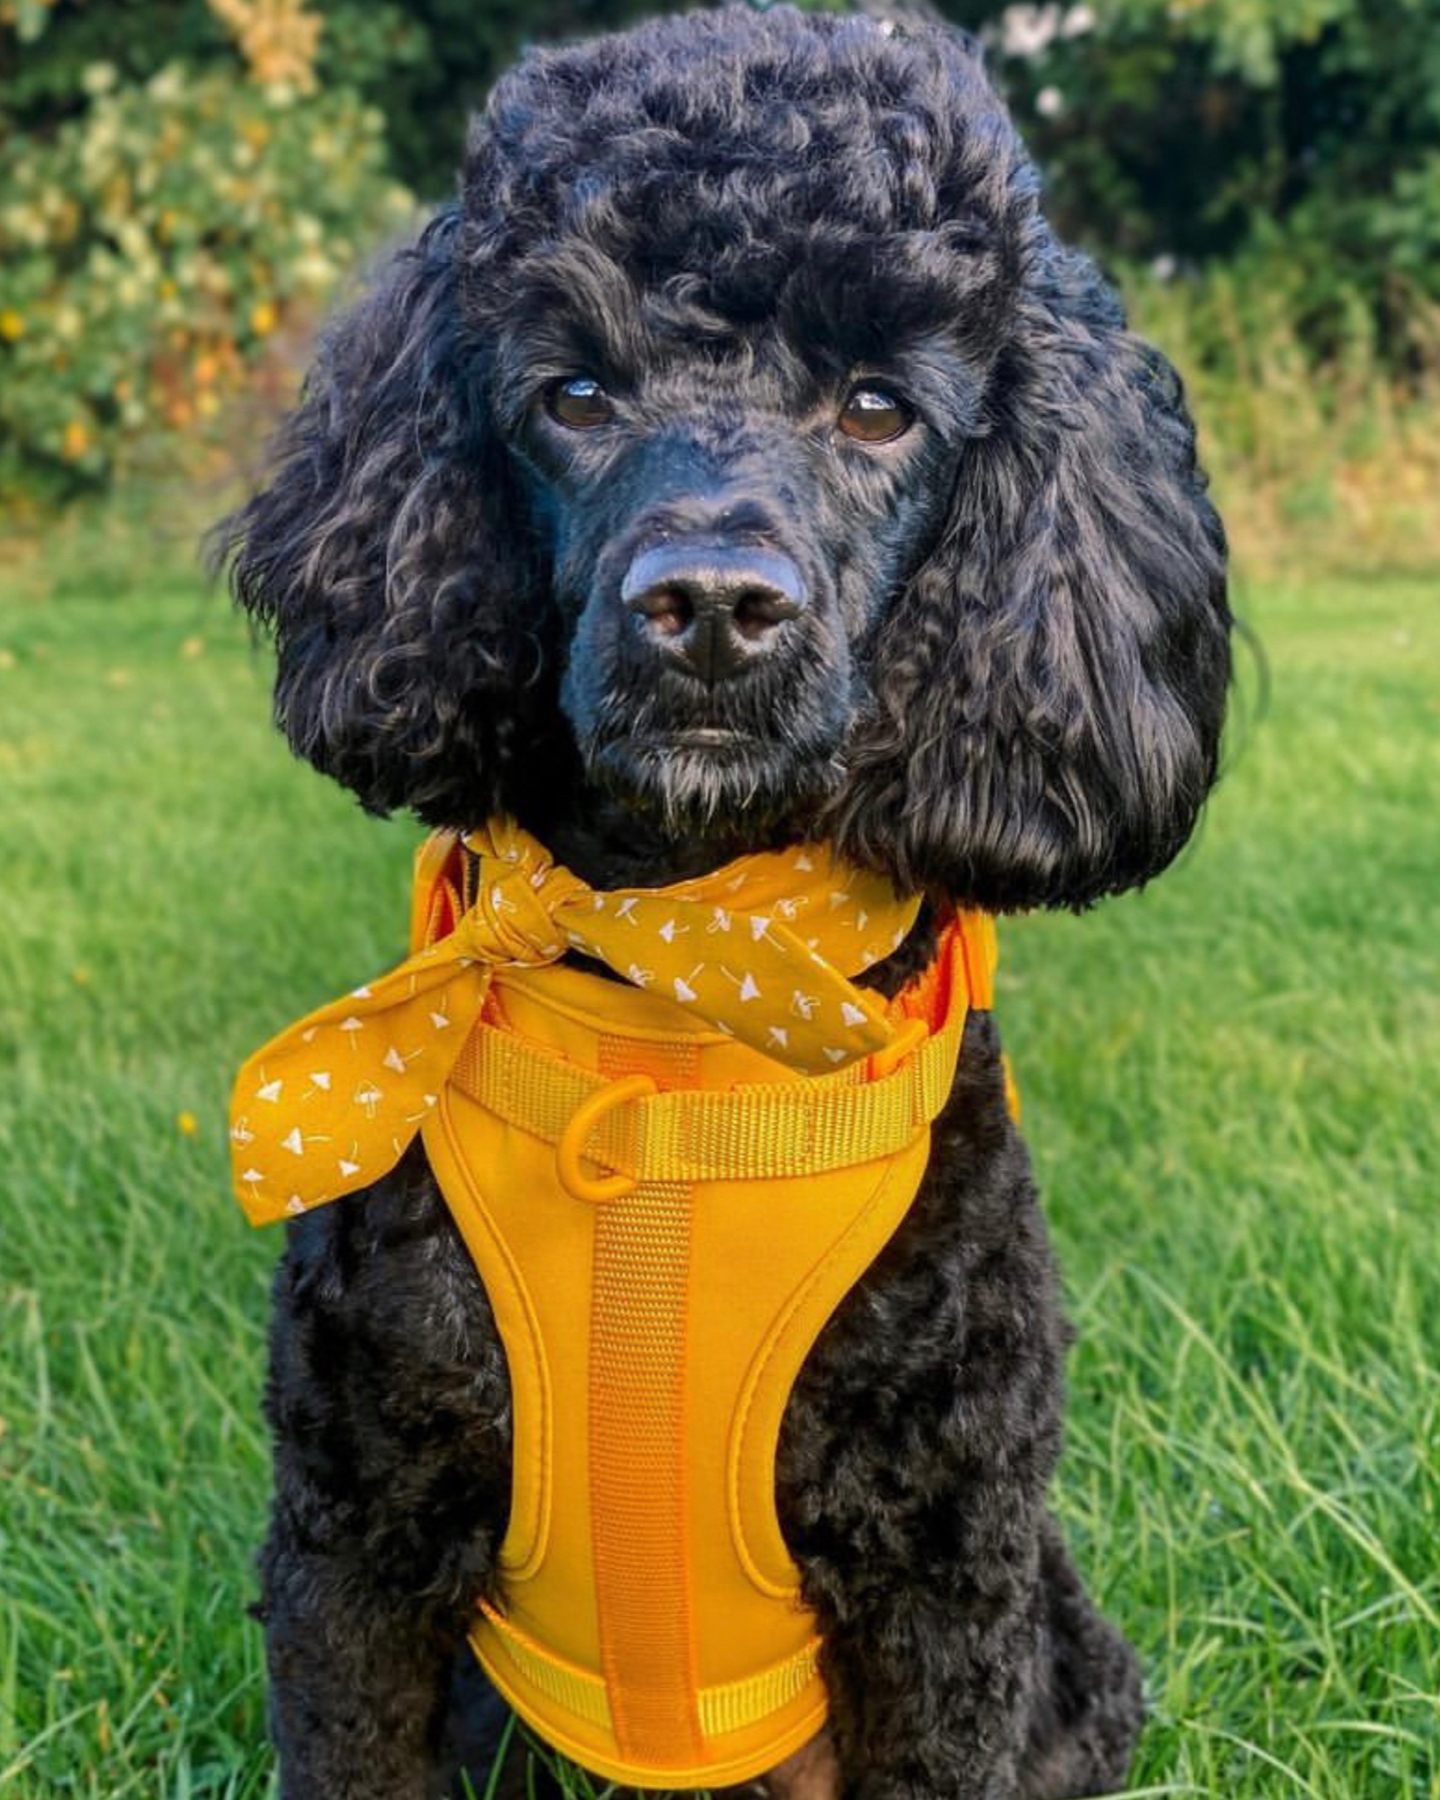 An adorable black dog with orange collar posing while someone wonders are black labradoodles good dogs?